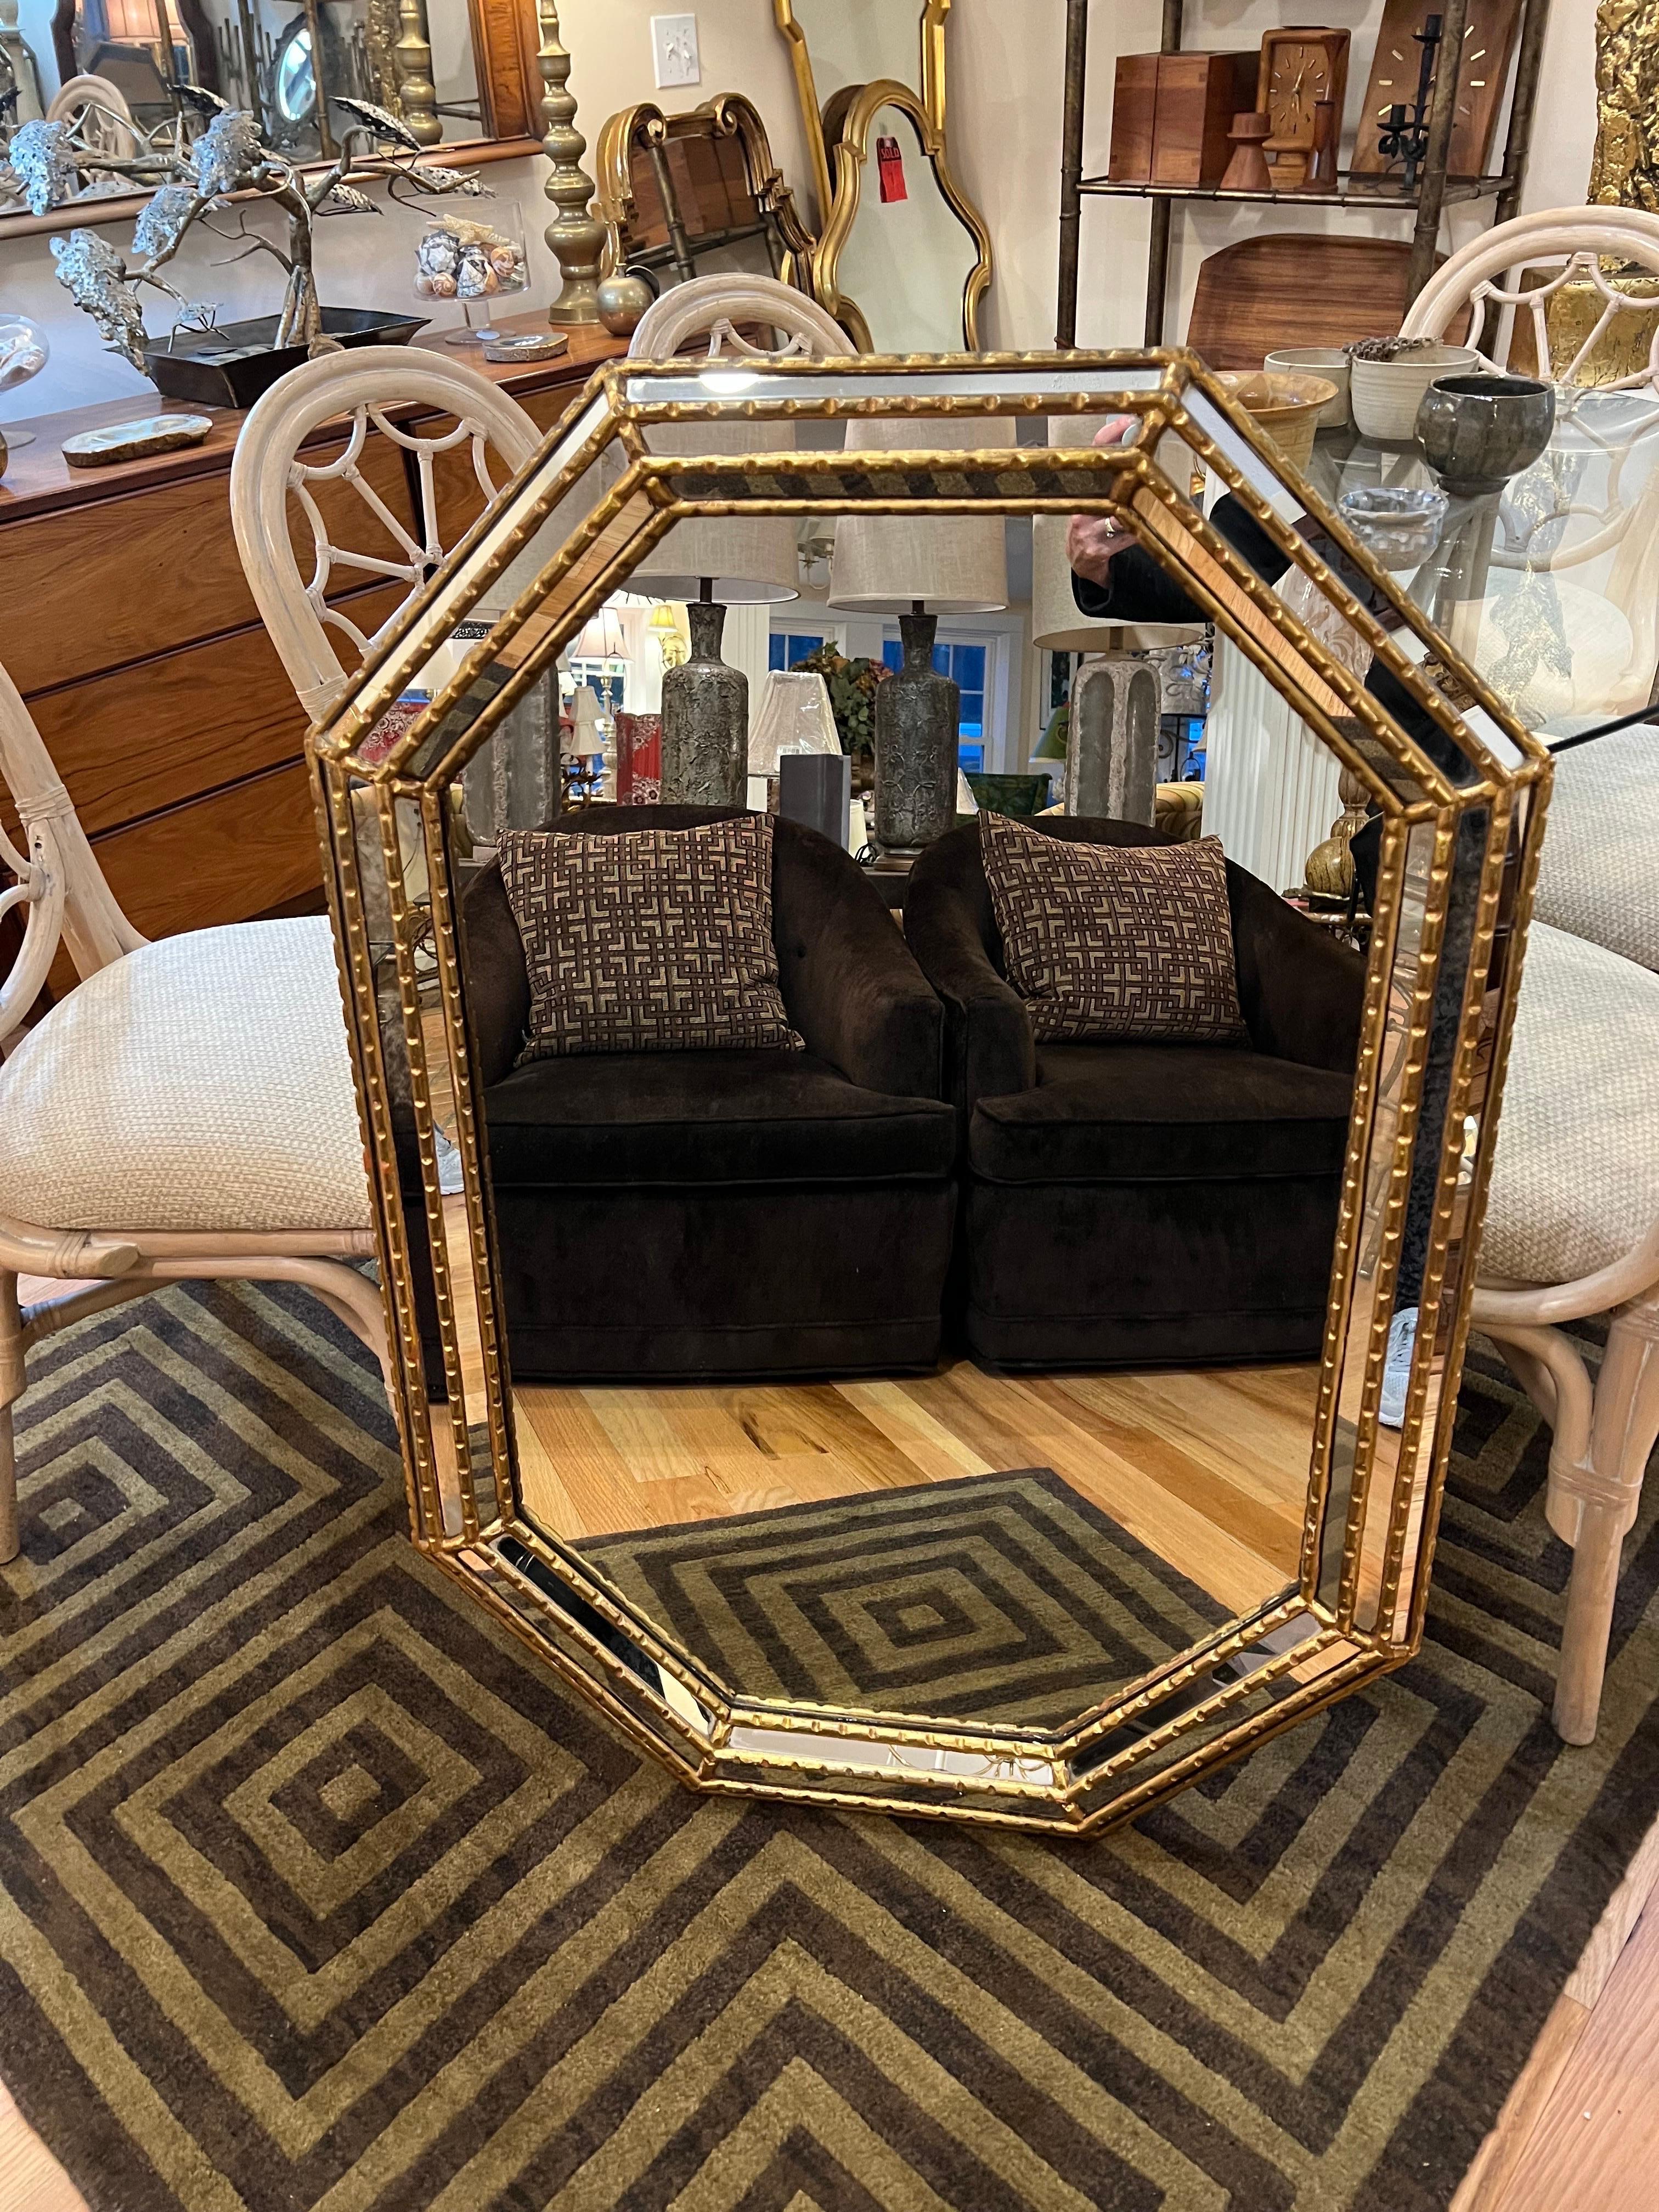 LaBarge Octagonal Gilt Mirror. Thick triple Beveled edges and wide frame make up this beauty. Interesting Octagonal shape . Perfect for a hallway or above a vanity.Solid wood and very well made piece. Signed on back with LaBarge Label.